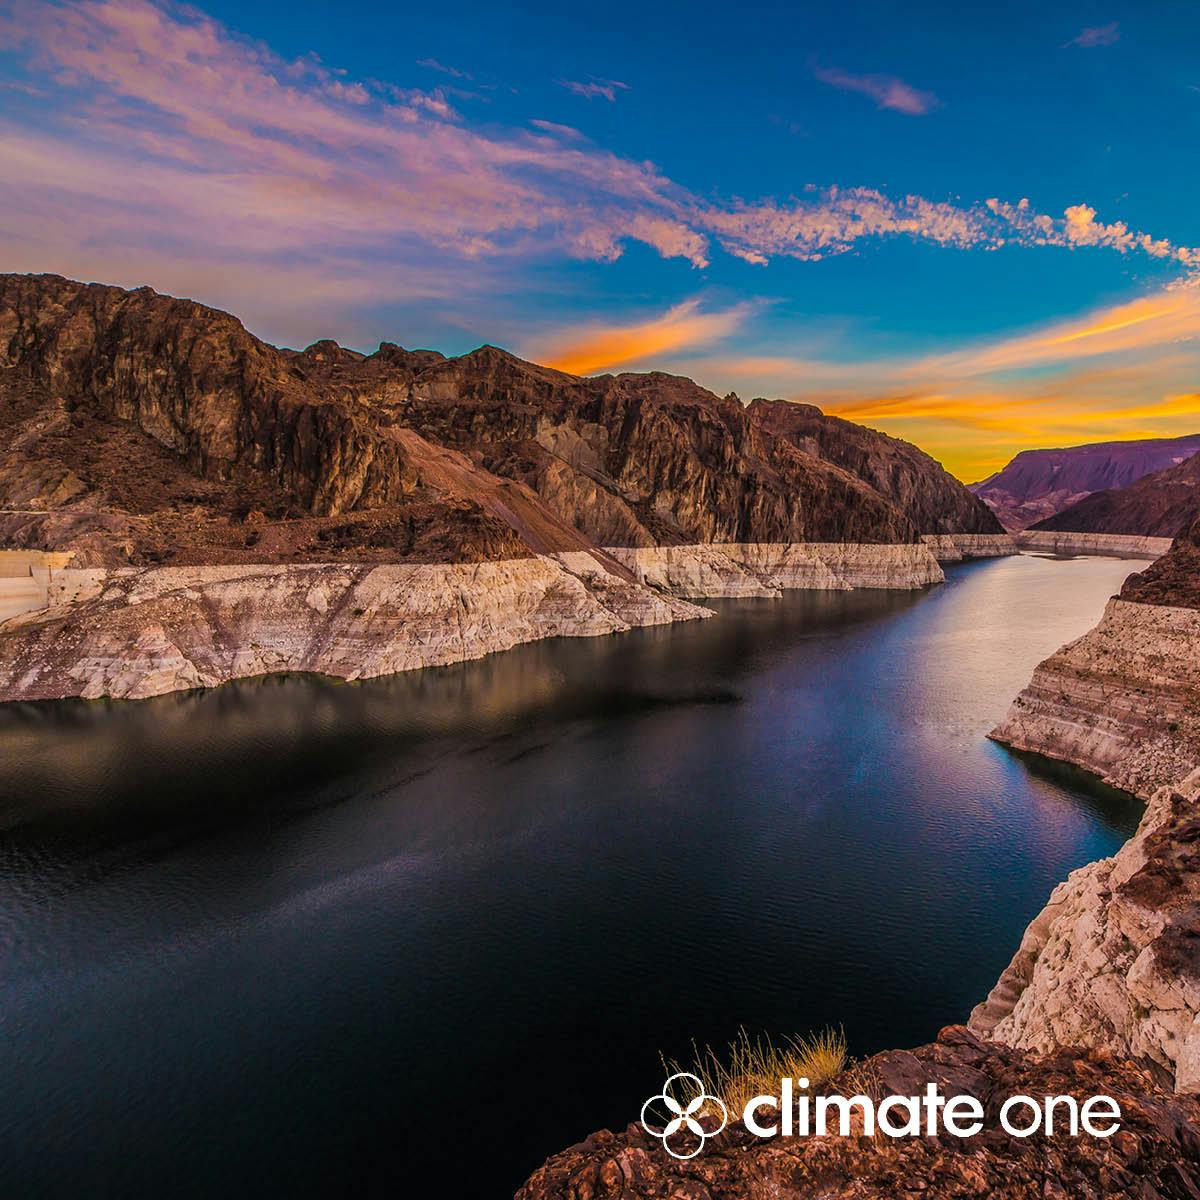  Colorado River Reckoning: Drought, Climate and Equal Access